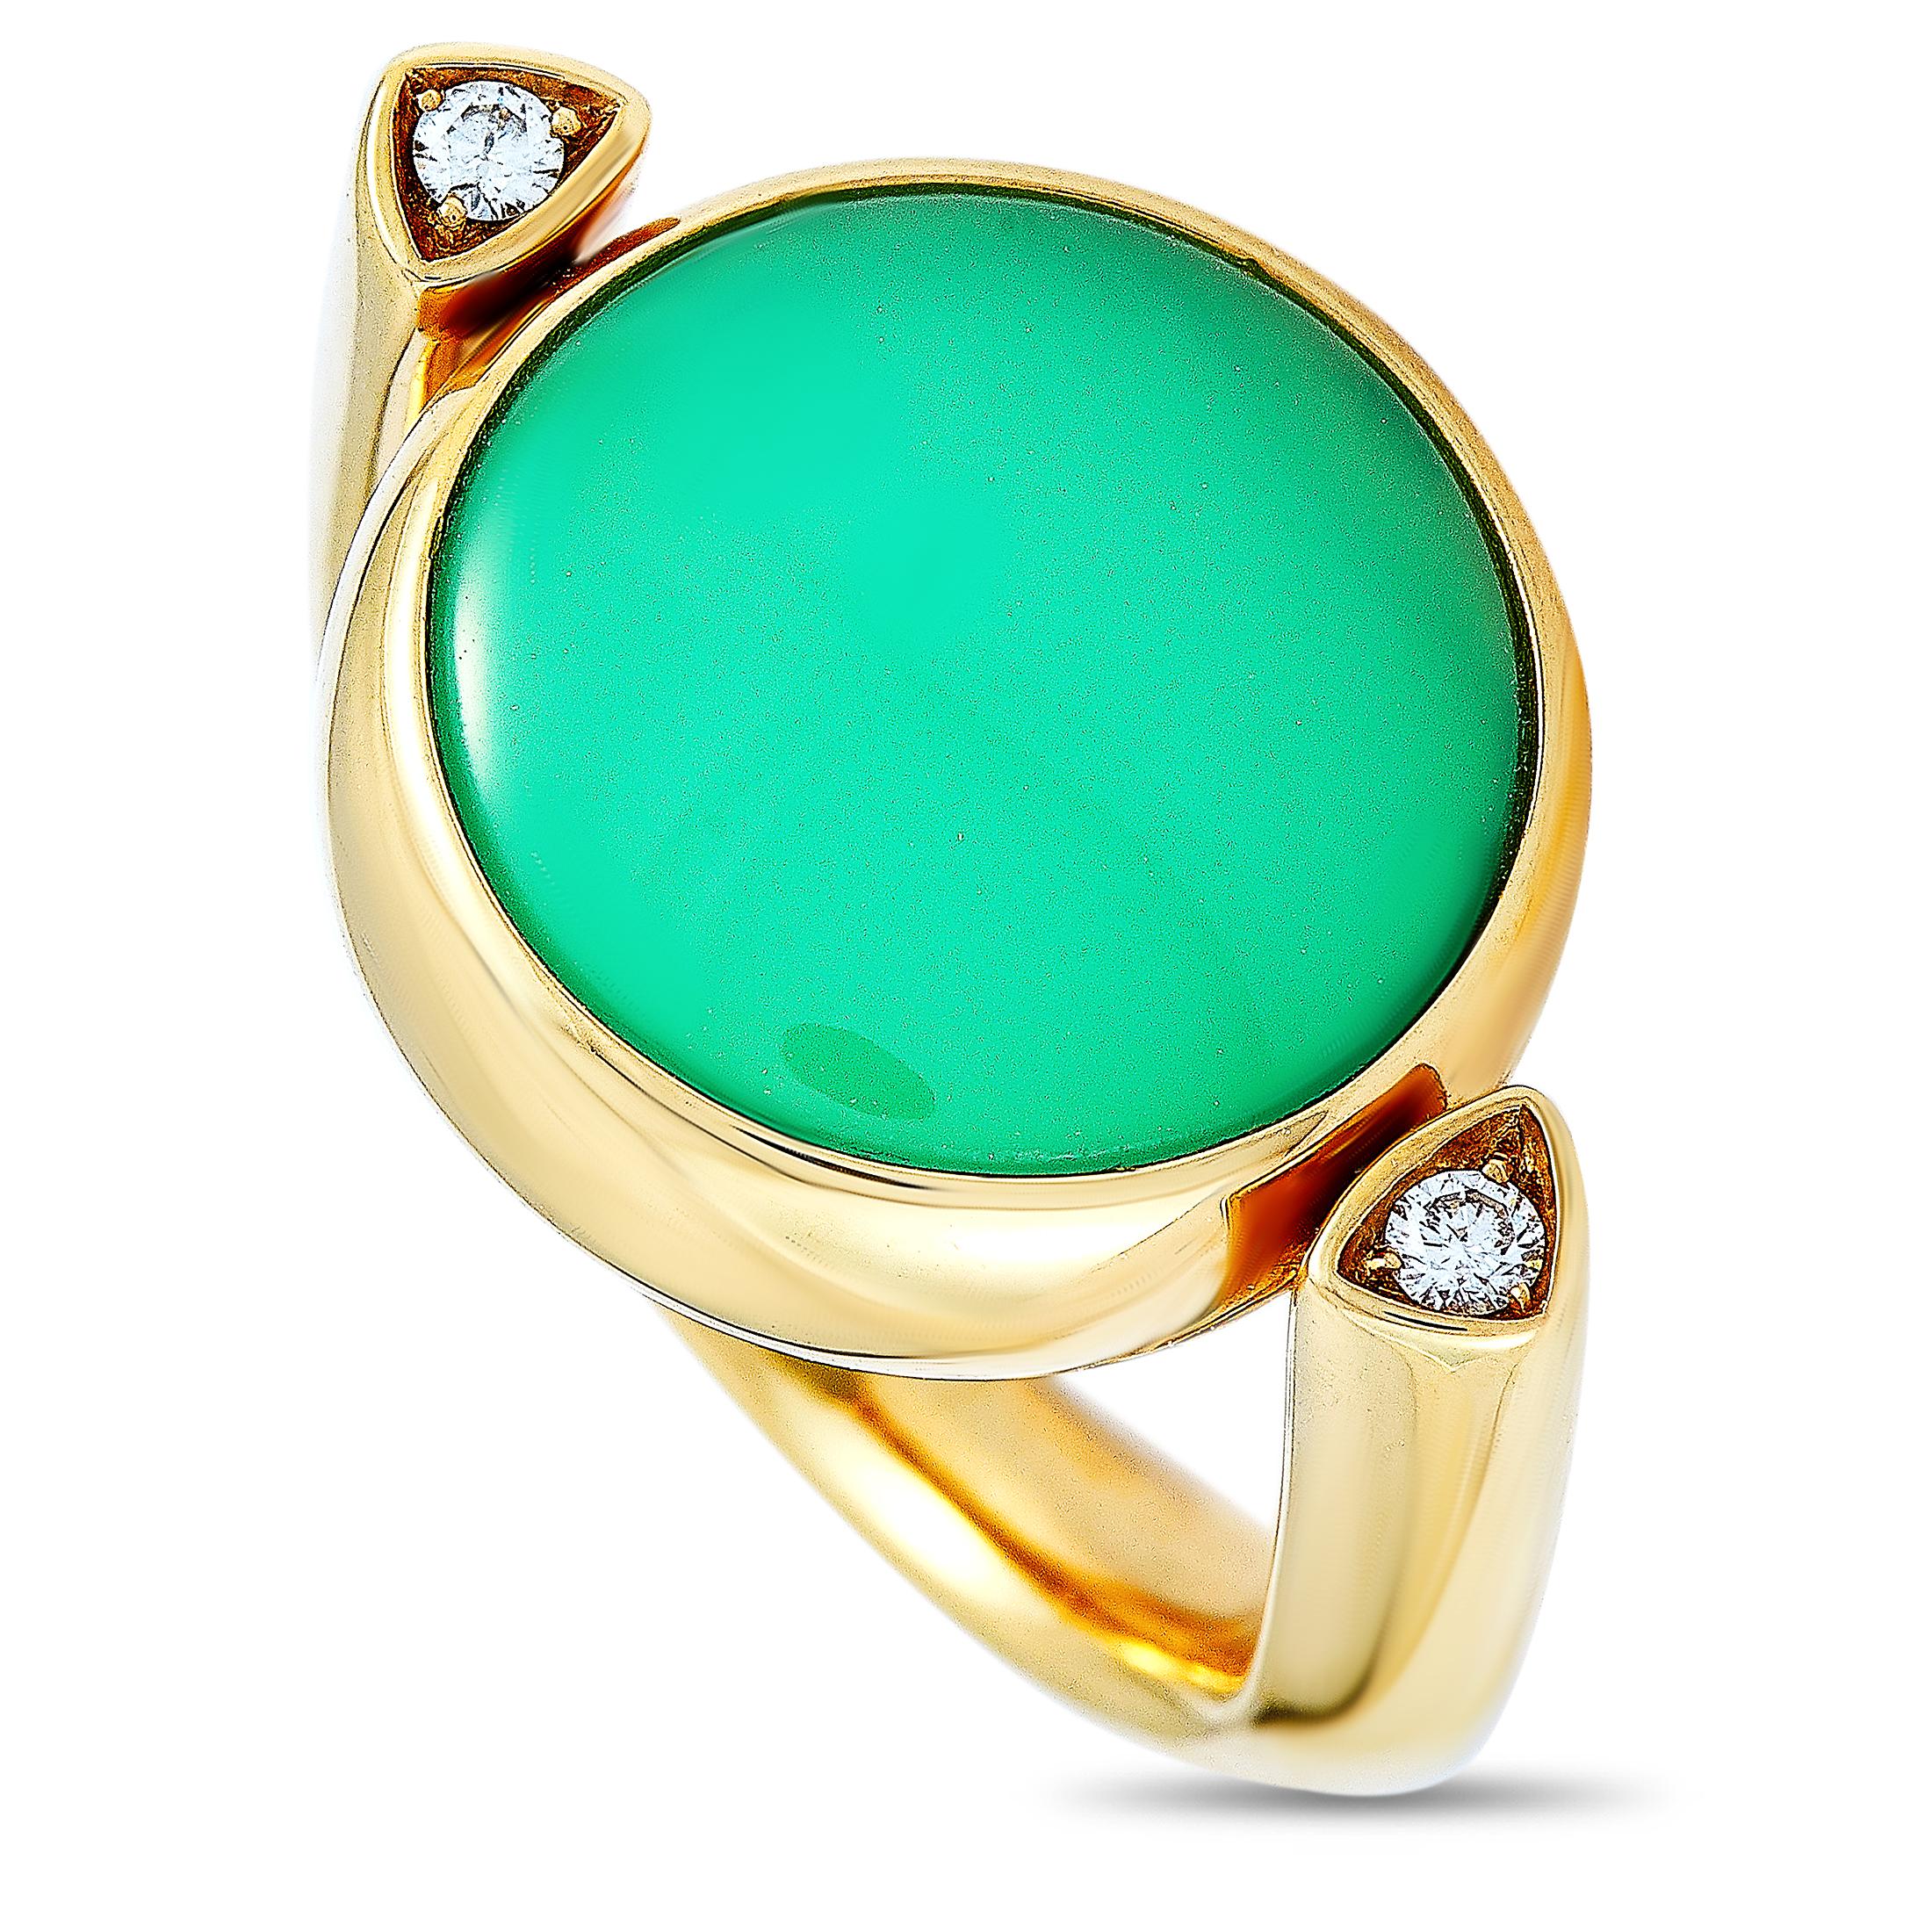 The Vhernier “Girotondo” ring is crafted from 18K rose gold and set with a white adularia on one side and a chrysoprase on the other, and with diamonds that total 0.06 carats. The ring weighs 9.9 grams and boasts band thickness of 3 mm and top